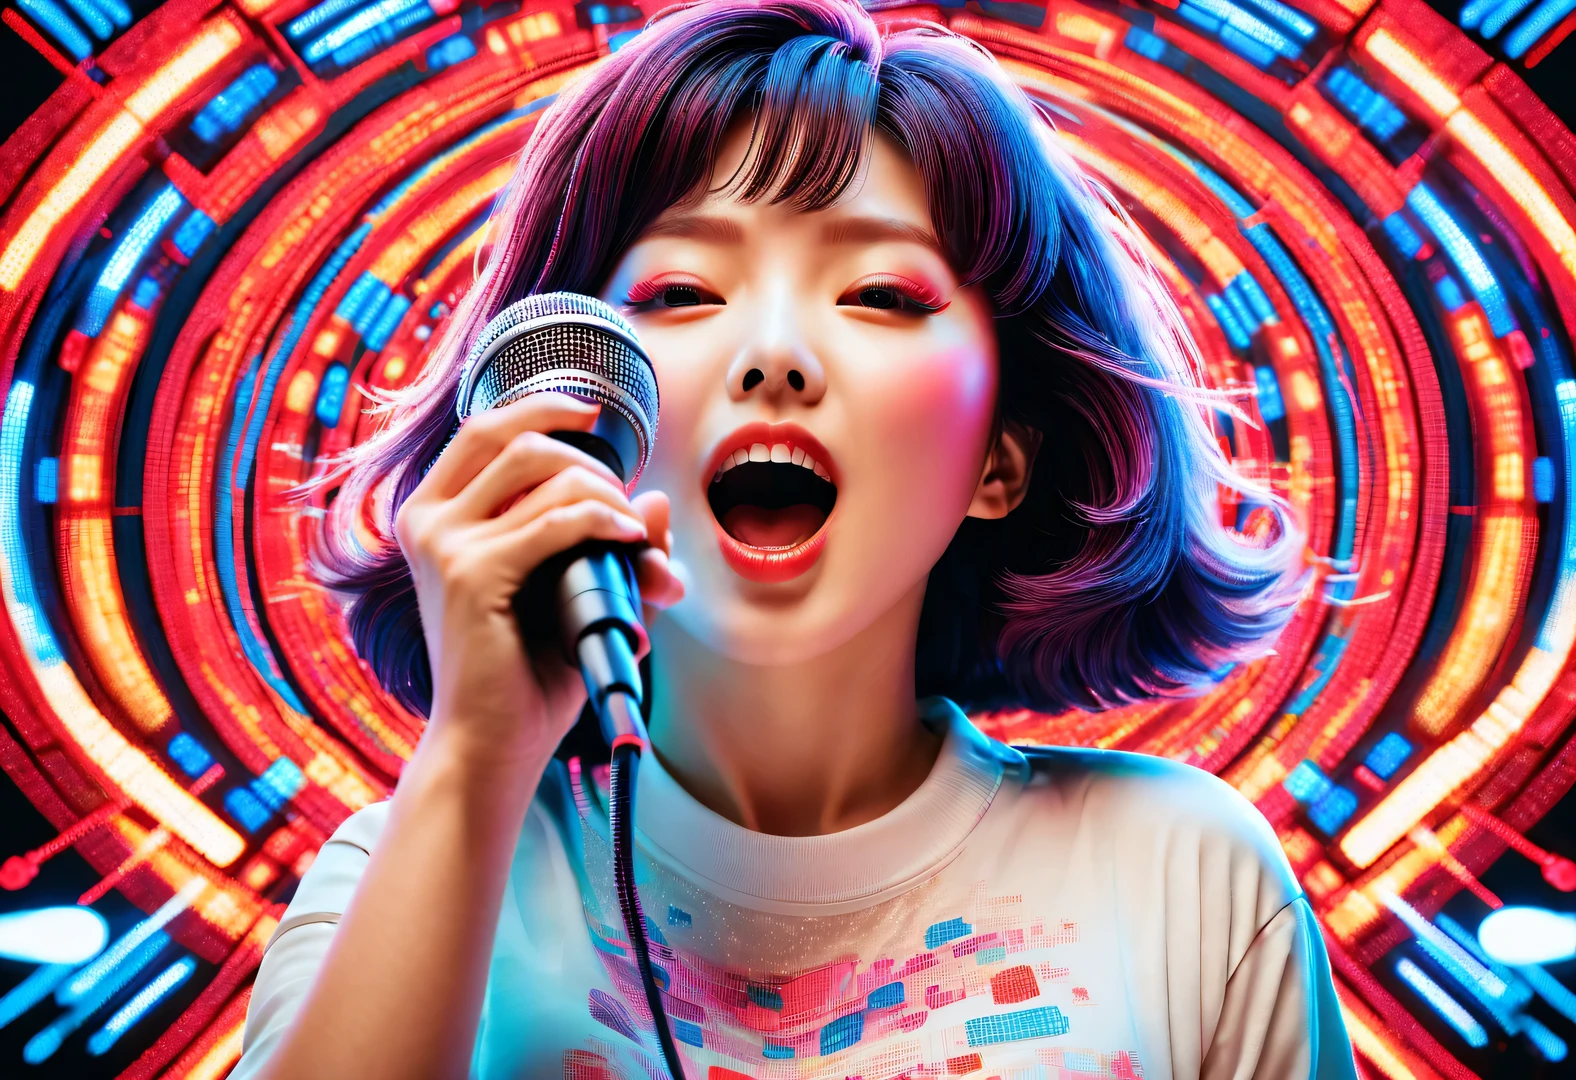 vaporwave style,Beautiful detailed,Vector illustration, Minimalism, digital illustration, Vector illustration，Minimalism，digital illustration，Hacker wearing sweatshirt and mask is working，time-shirt design，dramatic lighting，timerends at art shows
，Award-winning，icon，Highly detailed cute lively Korean actress Shim Eun-kyung holding a microphone and singing loudly with her mouth open in front of a super huge LED screen），Jumping pose，dynamic action，inspired by《strange her》，Shen Eun-kyung combed her hair into a slightly curly baby style，Very fair skin，timehere are two charming dimples on both cheeks，Wearing a red embroidered lace dress，background：LED screen, dramatic lighting, time

